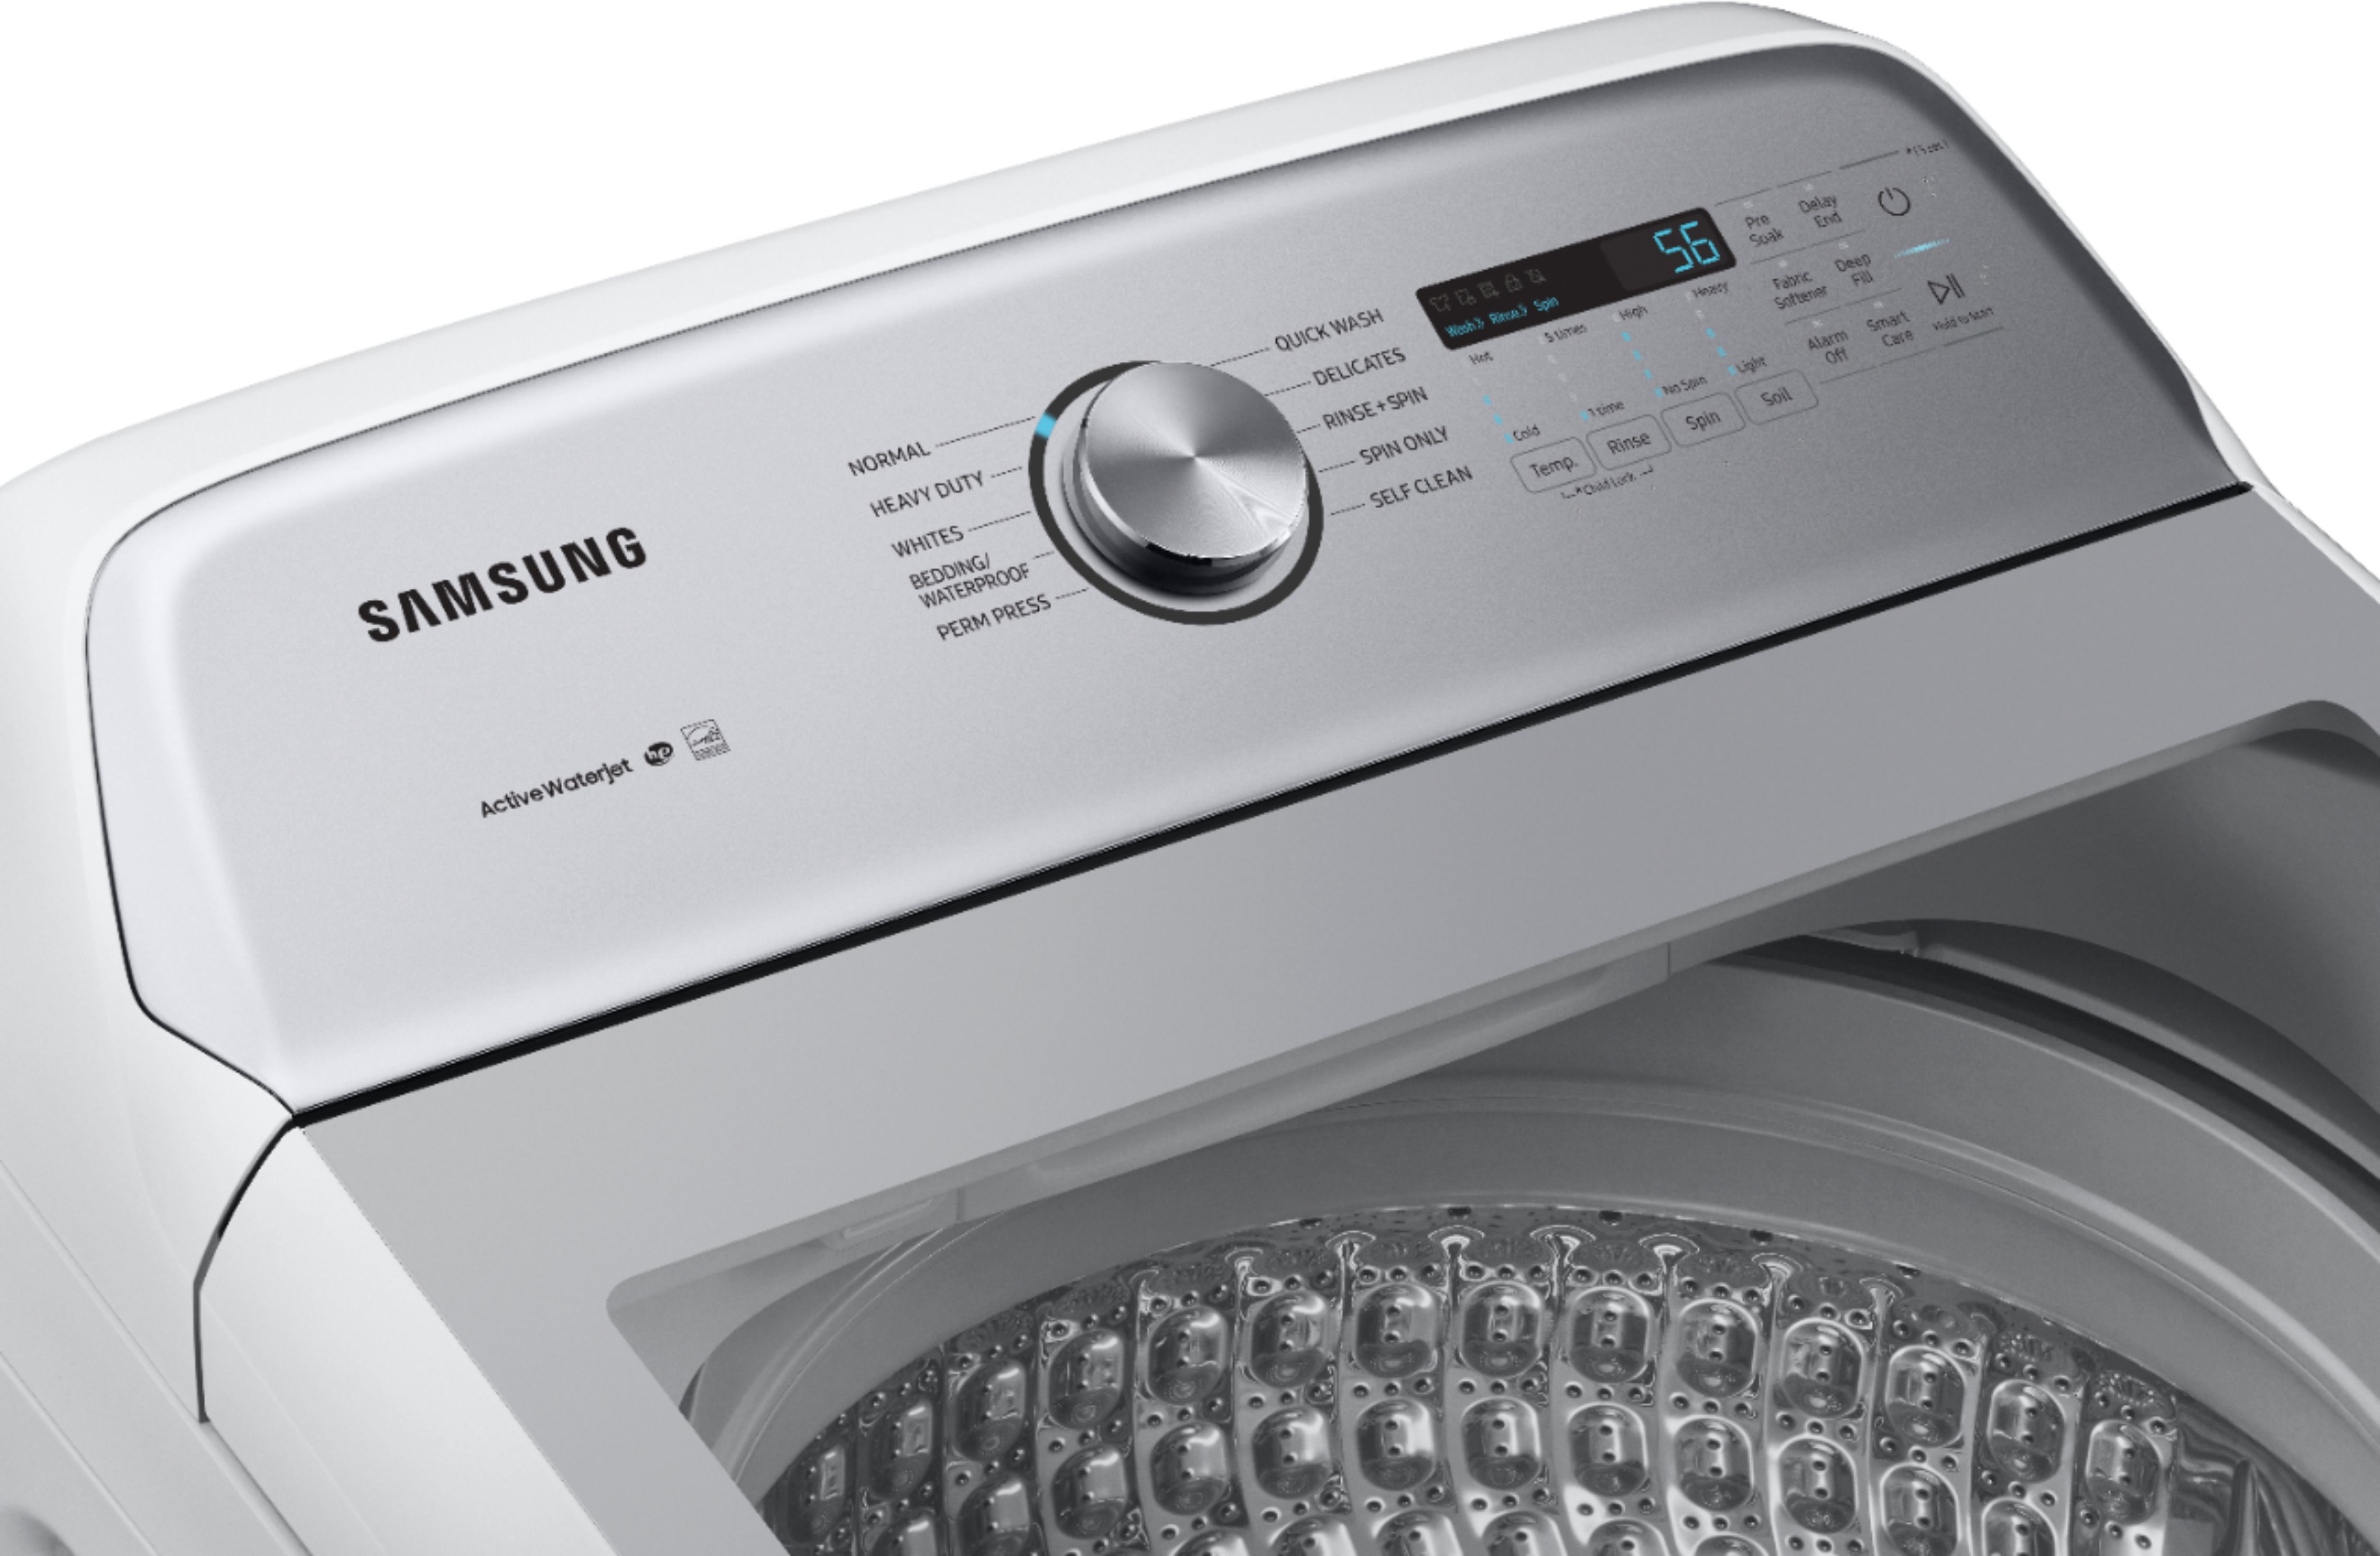 Samsung Active Wash Washer & Dryer Review at Best Buy